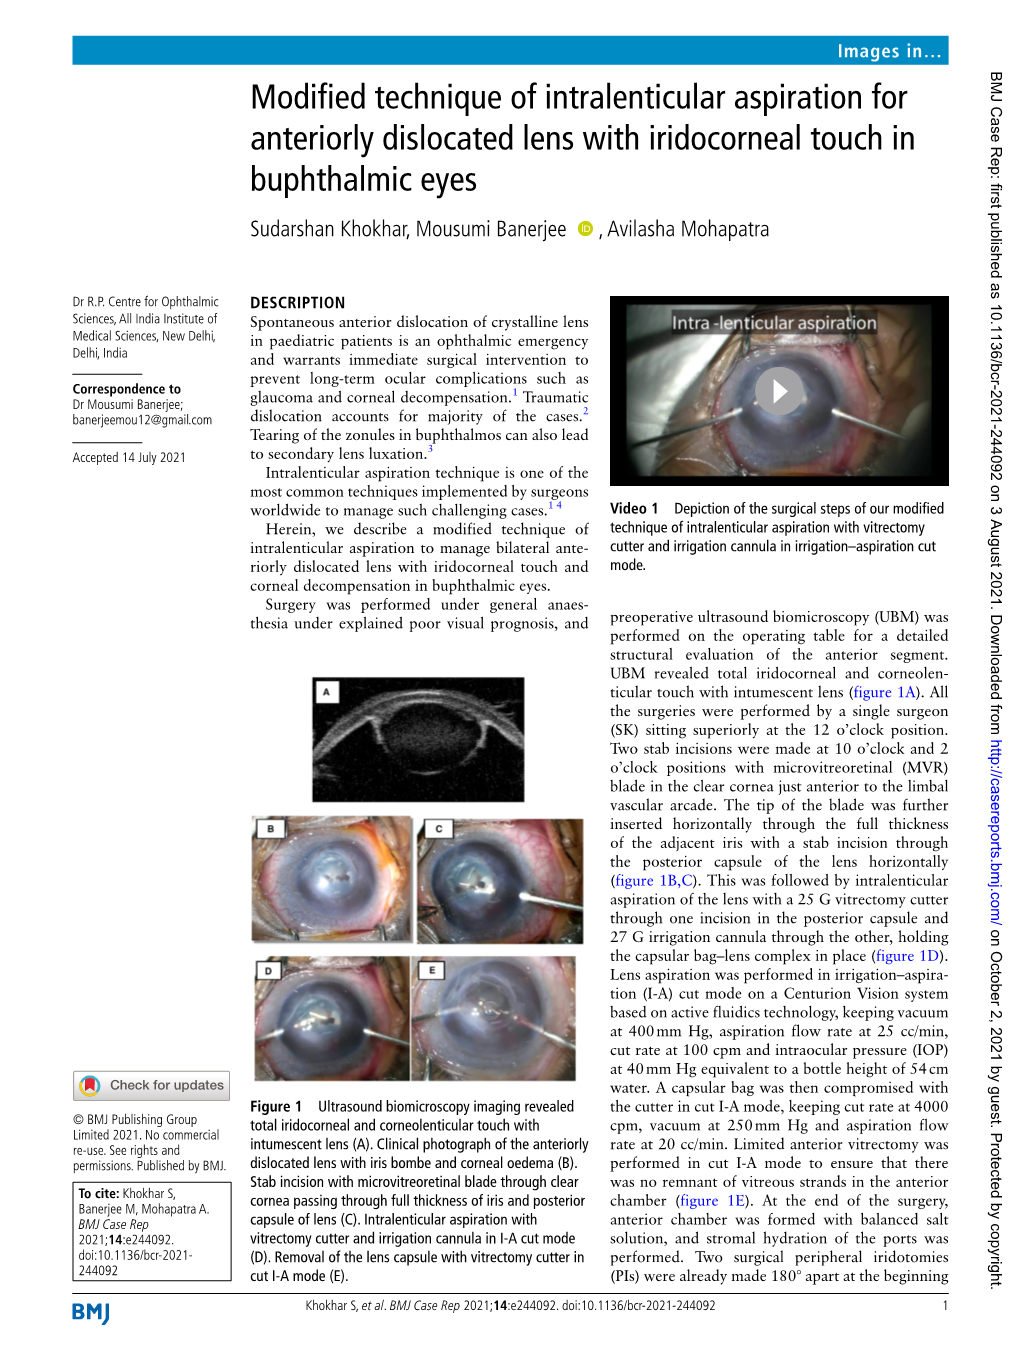 Modified Technique of Intralenticular Aspiration for Anteriorly Dislocated Lens with Iridocorneal Touch in Buphthalmic Eyes